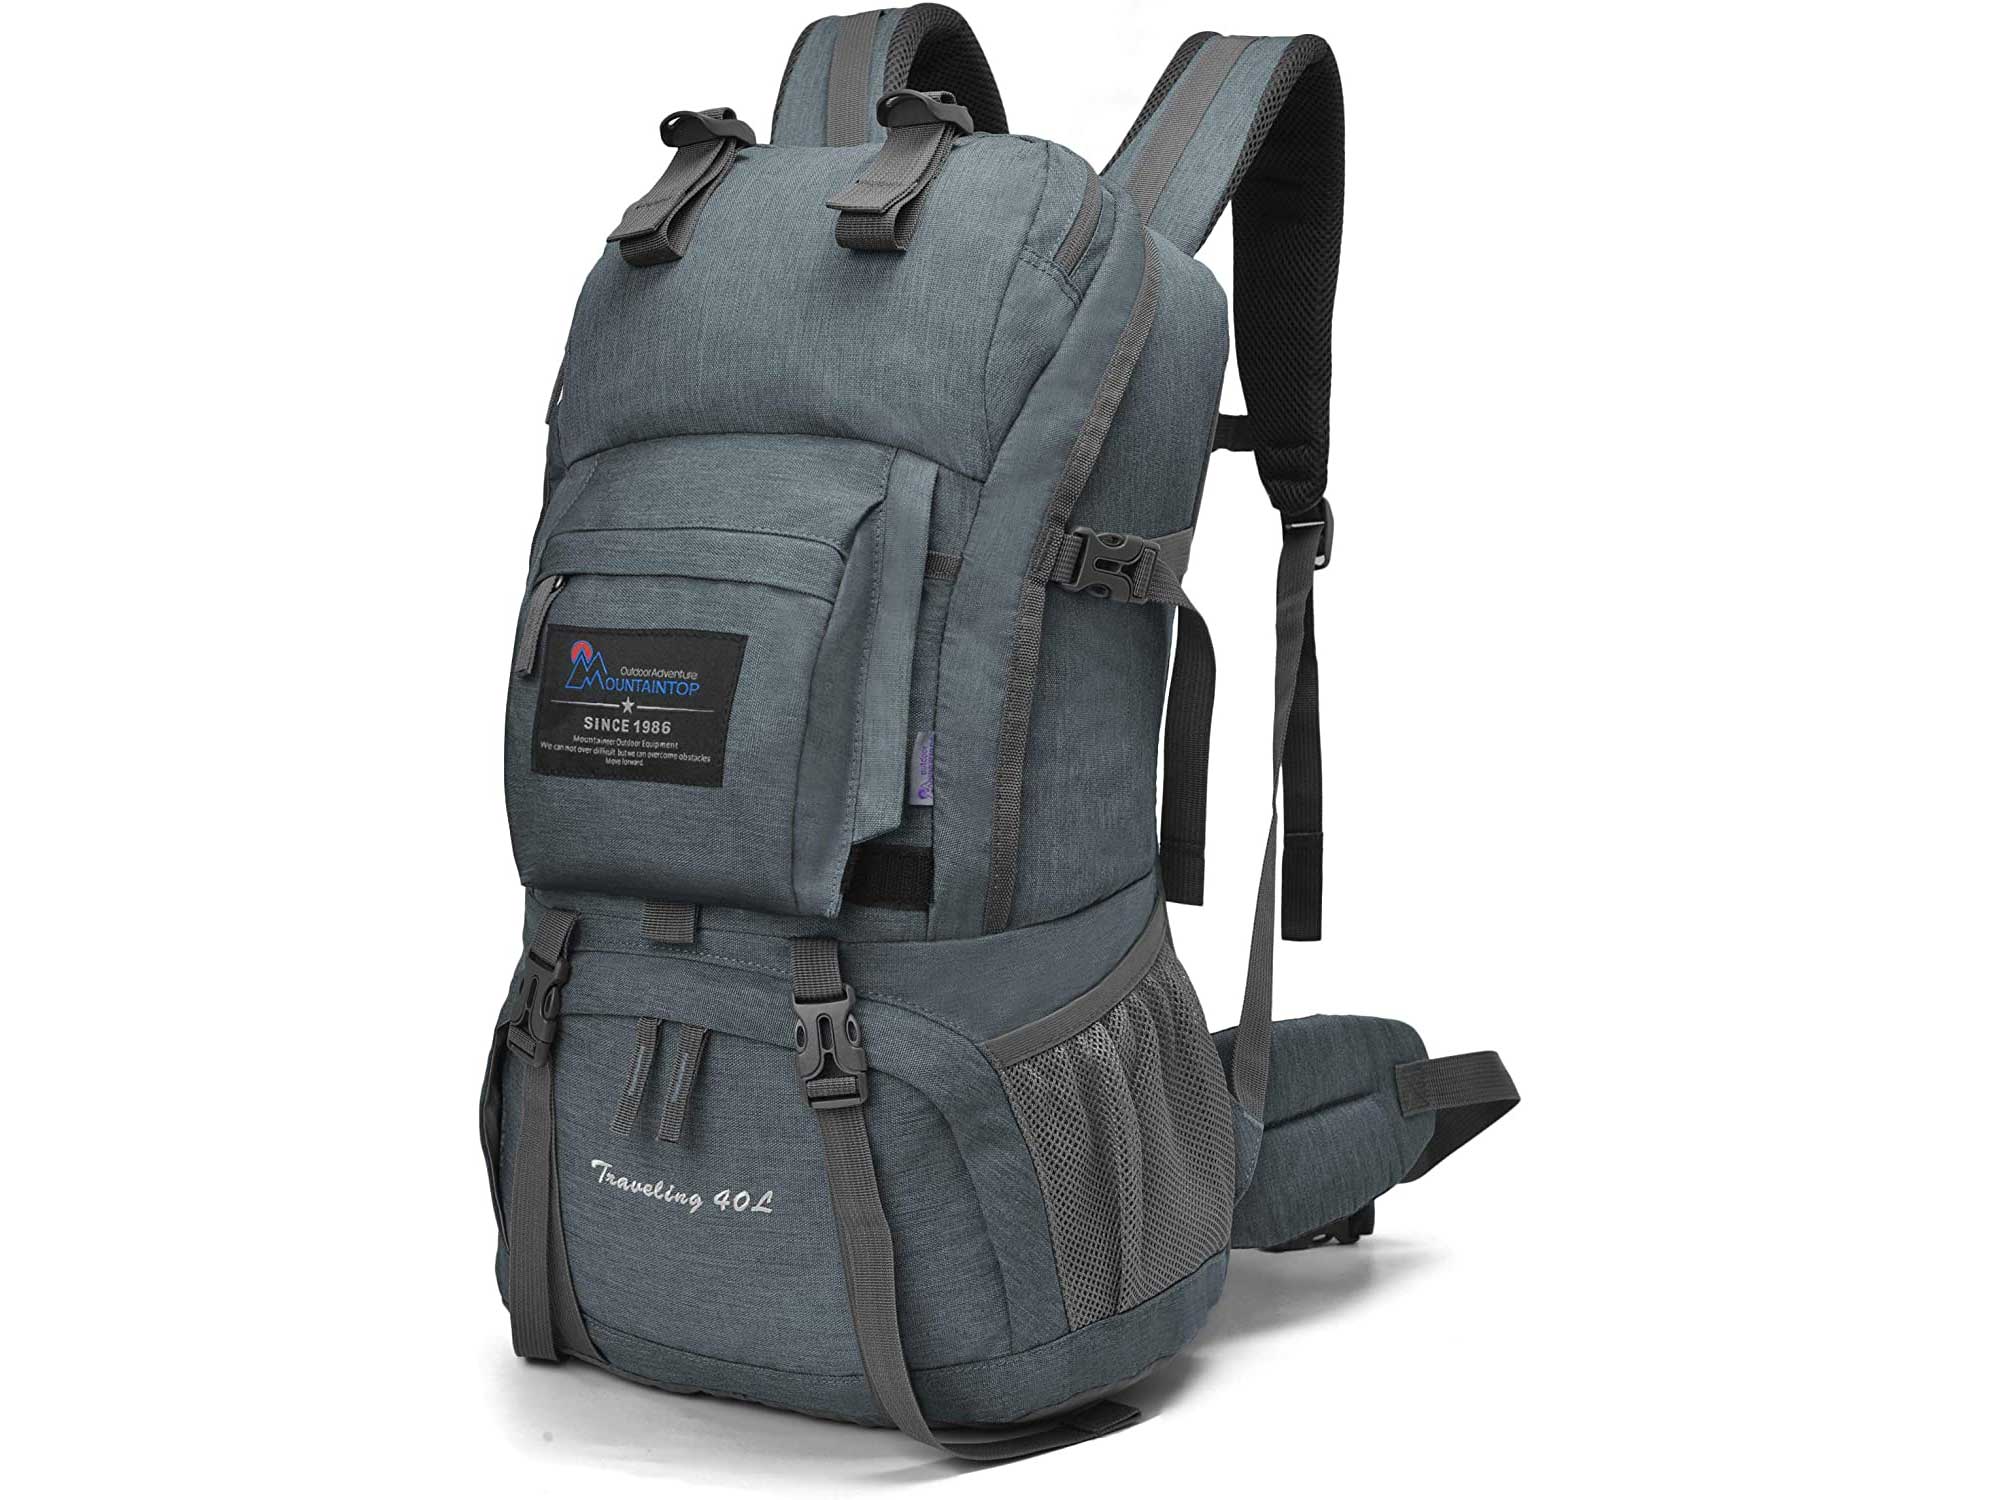 Mountaintop 40L Hiking Backpack